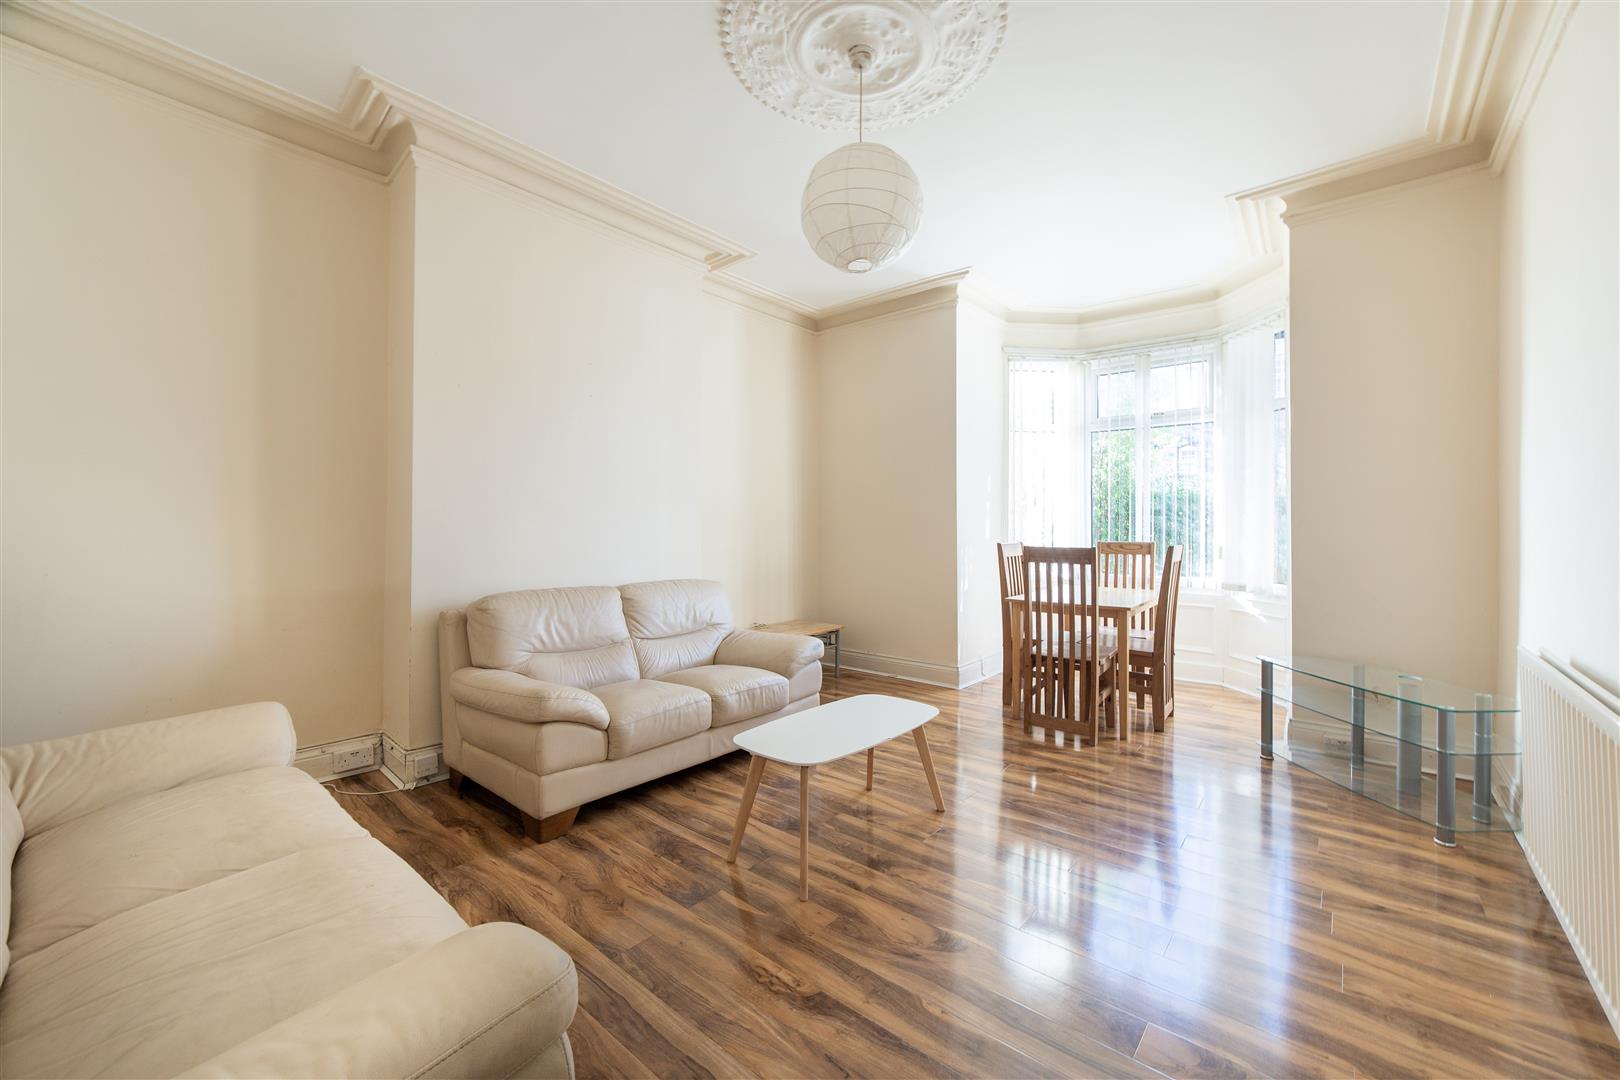 4 bed terraced house to rent in Chillingham Road, Newcastle Upon Tyne - Property Image 1